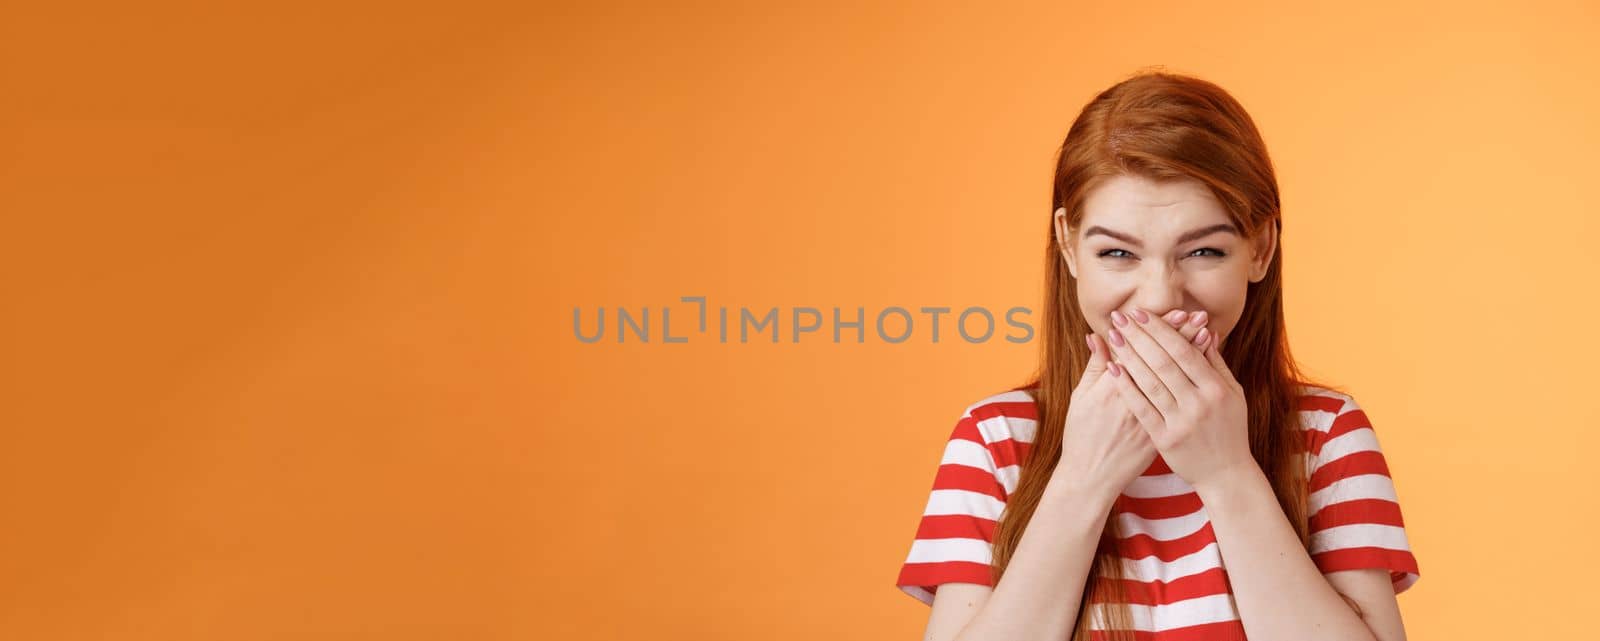 haha very funny. Silly tender cheerful redhead girl laughing, giggle hilarious joke, cover mouth press palms lips chuckling silent, mocking friend, stand upbeat orange background. Copy space